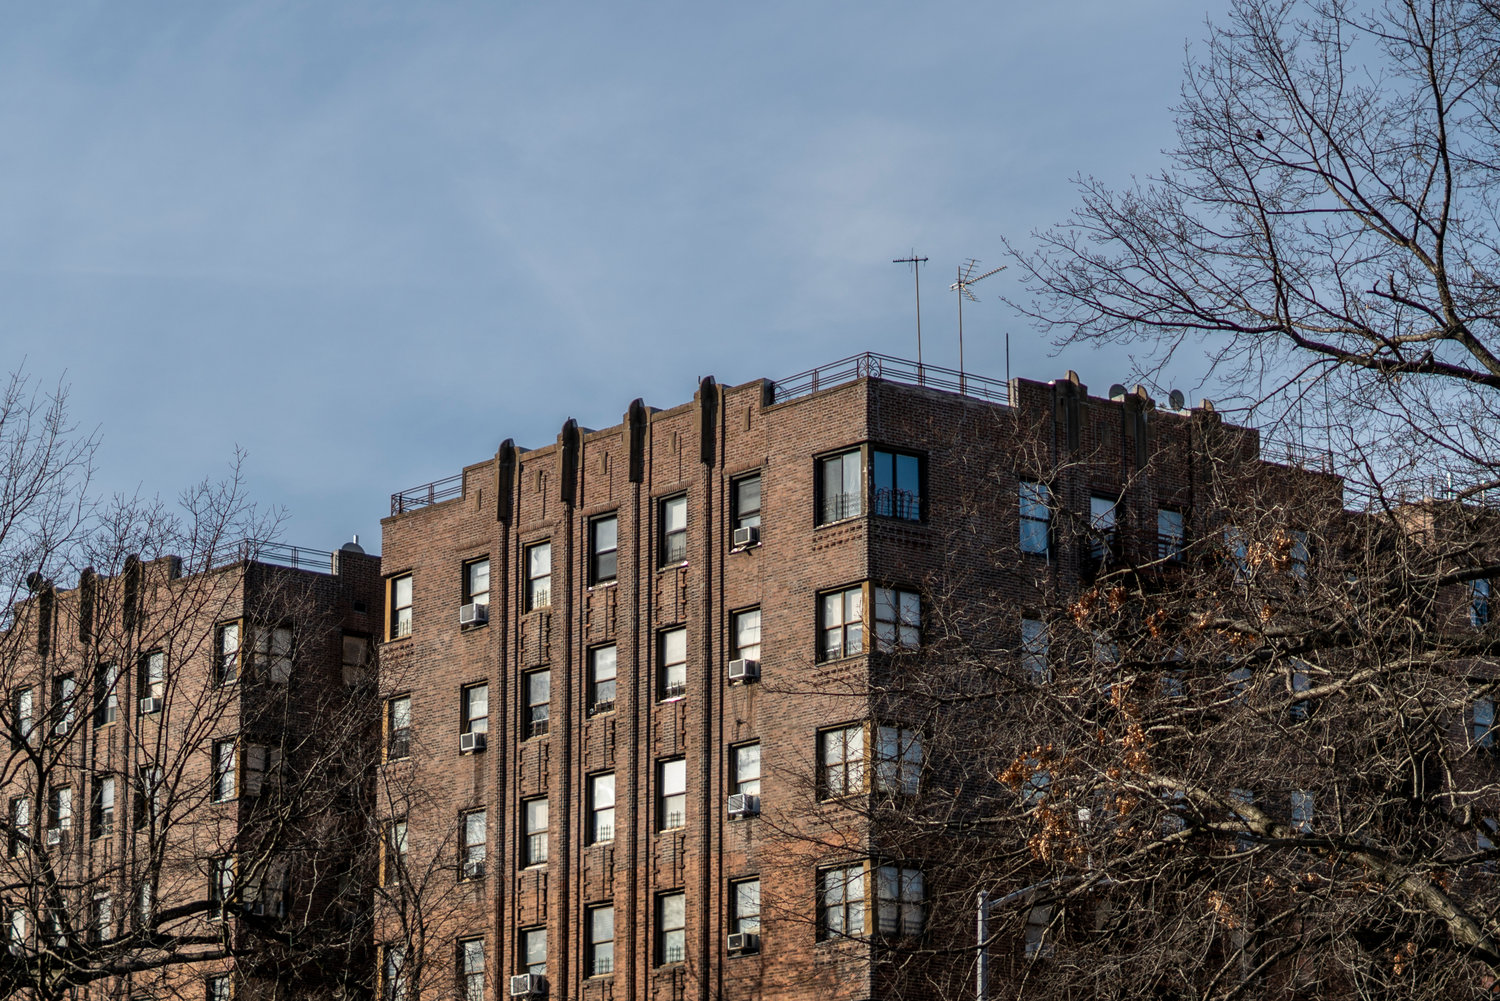 Tenants at 99 Marble Hill Ave., have complained about lack of heating, a broken elevator and mold for years. Richard Nussbaum, the building’s landlord, is among the public advocate’s worst landlords.